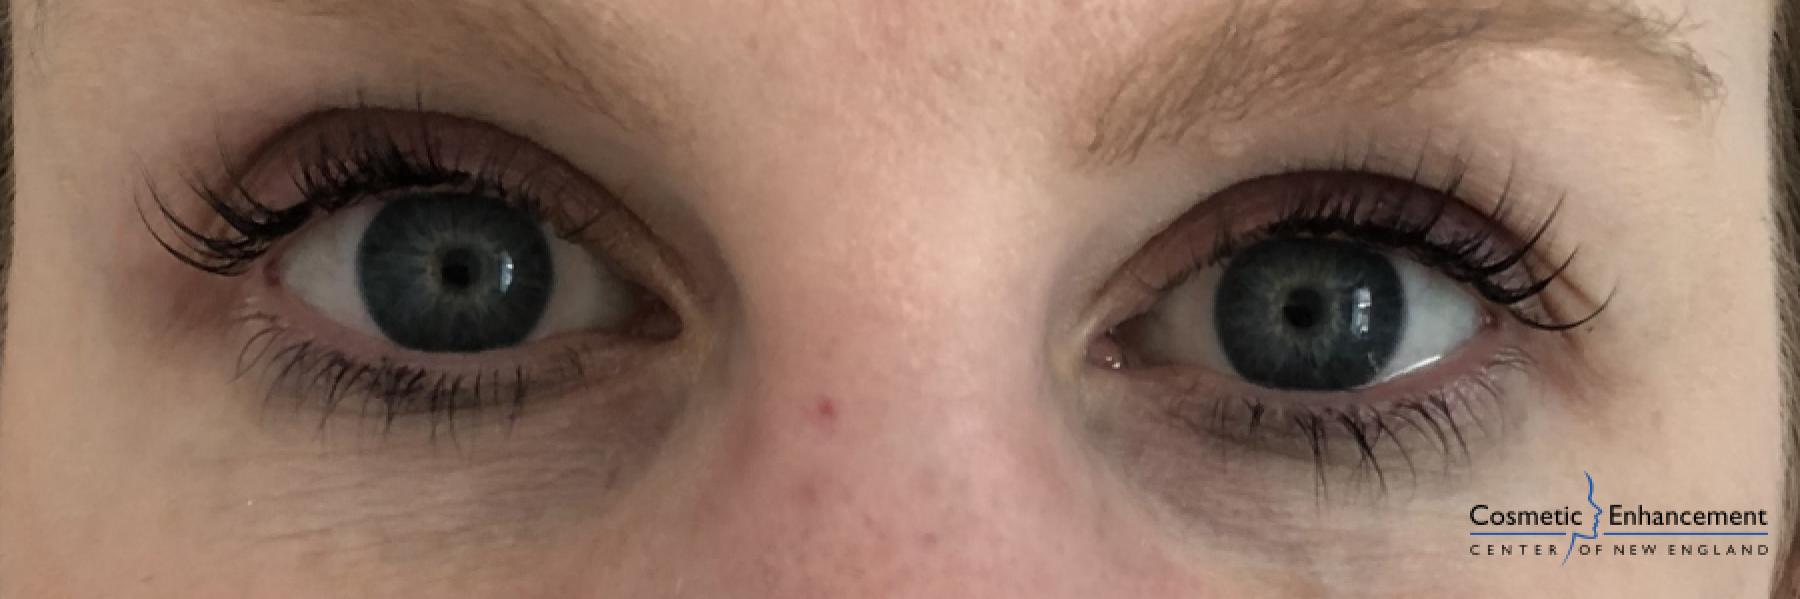 Lash Lift And Tint: Patient 2 - After  